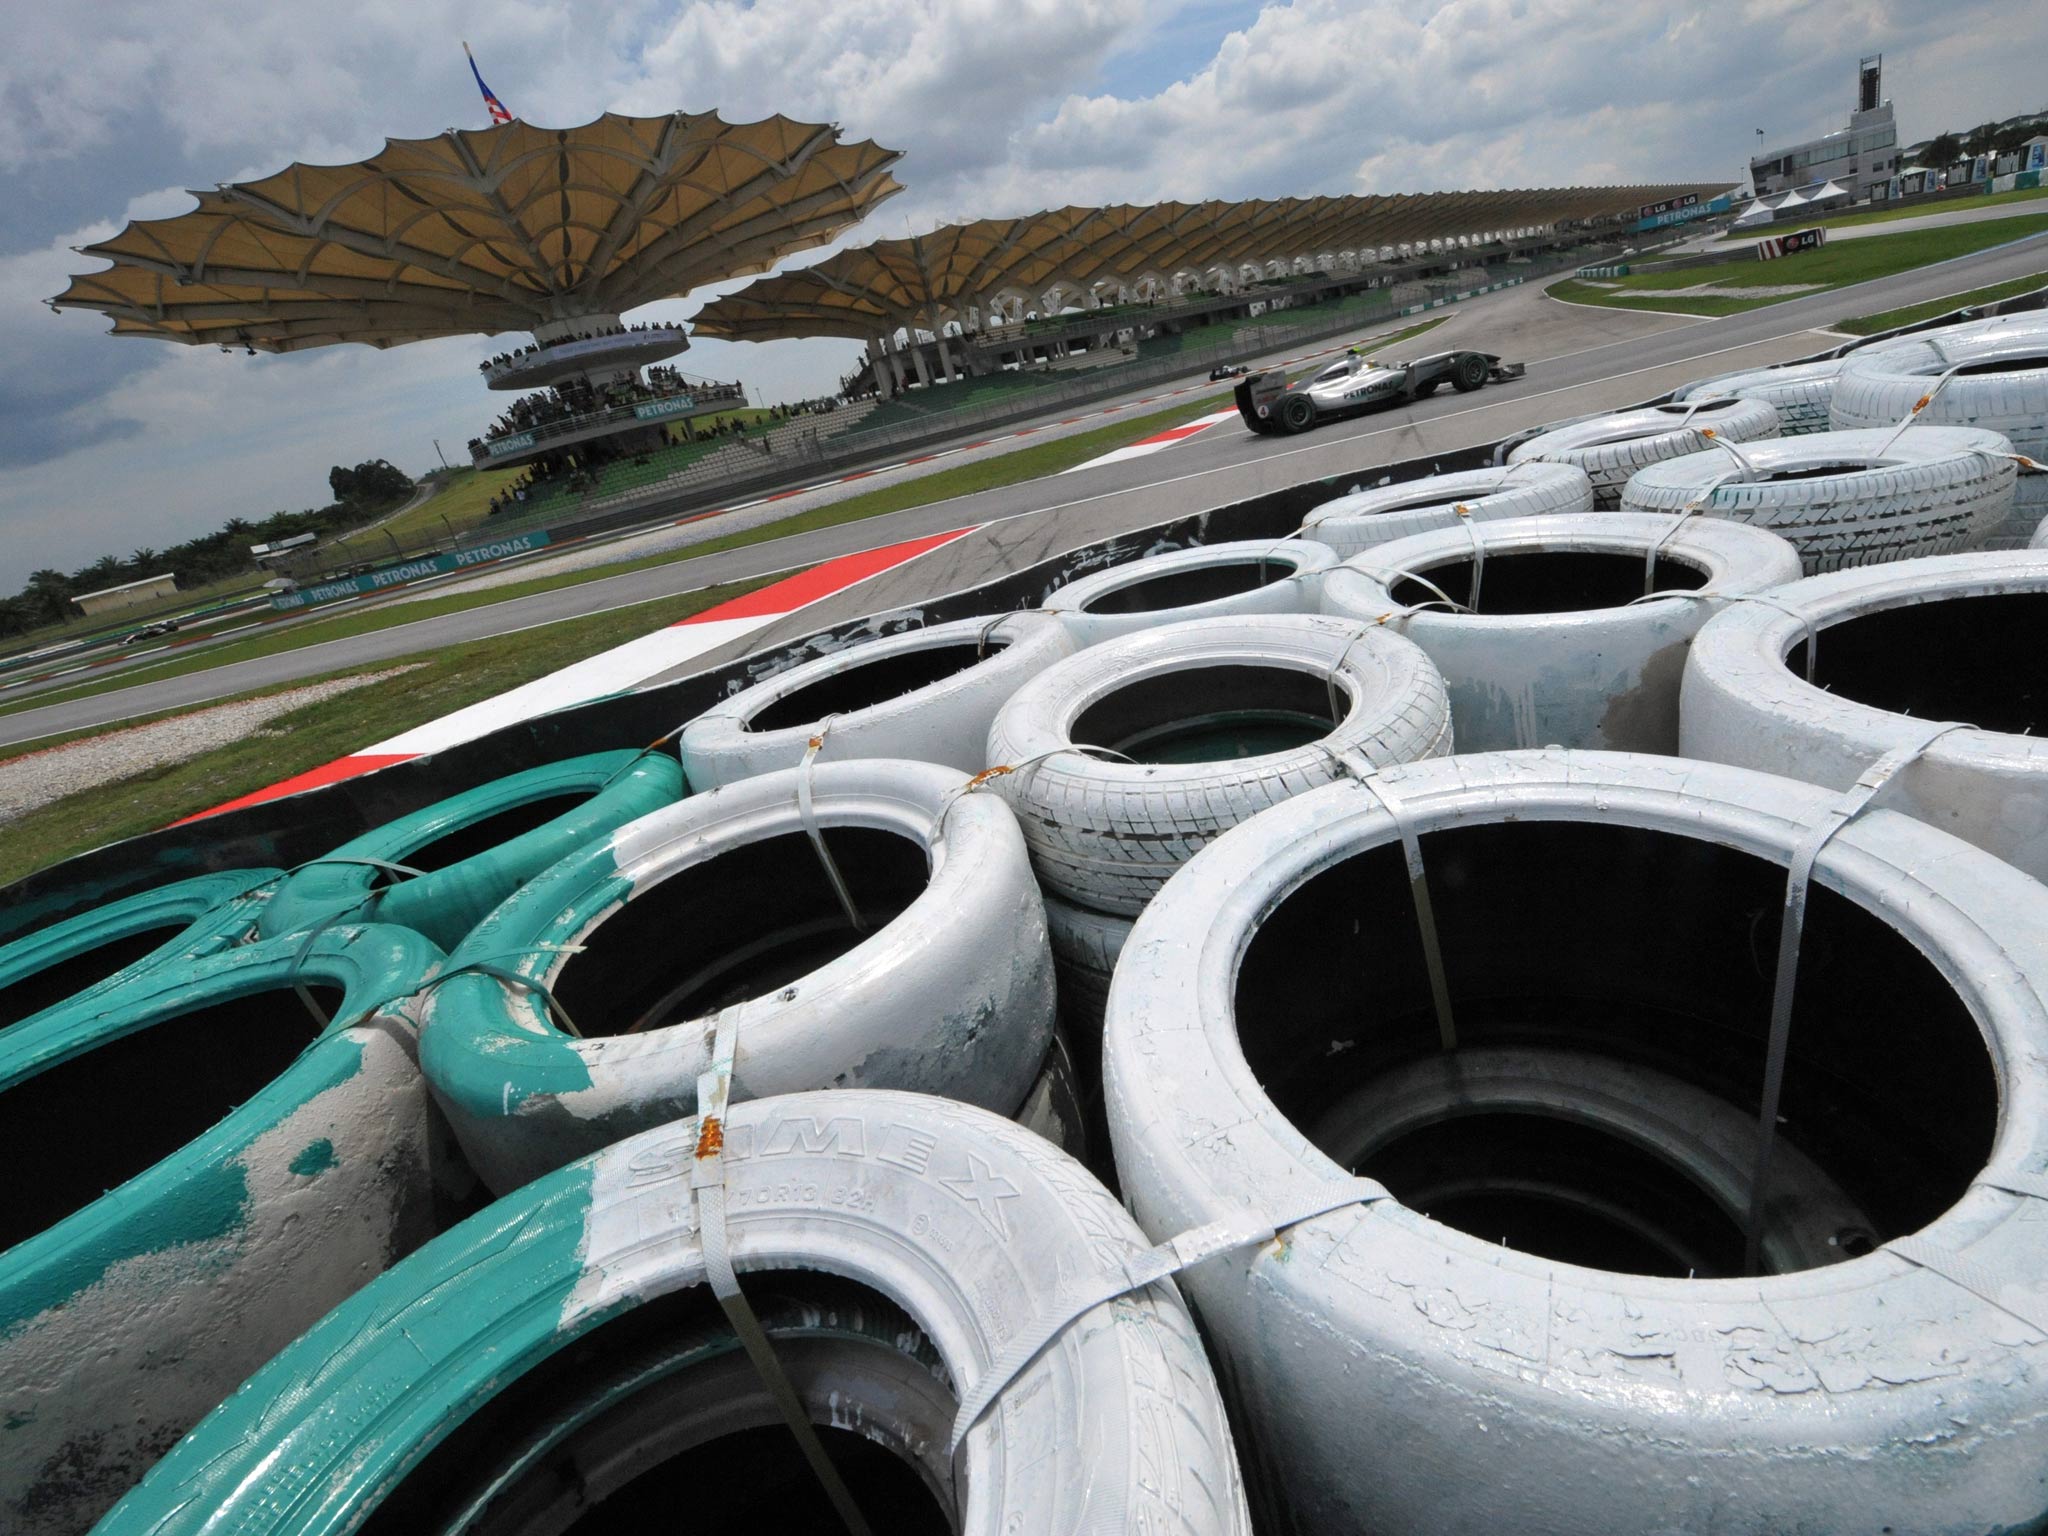 A view of the Malaysian Grand Prix circuit